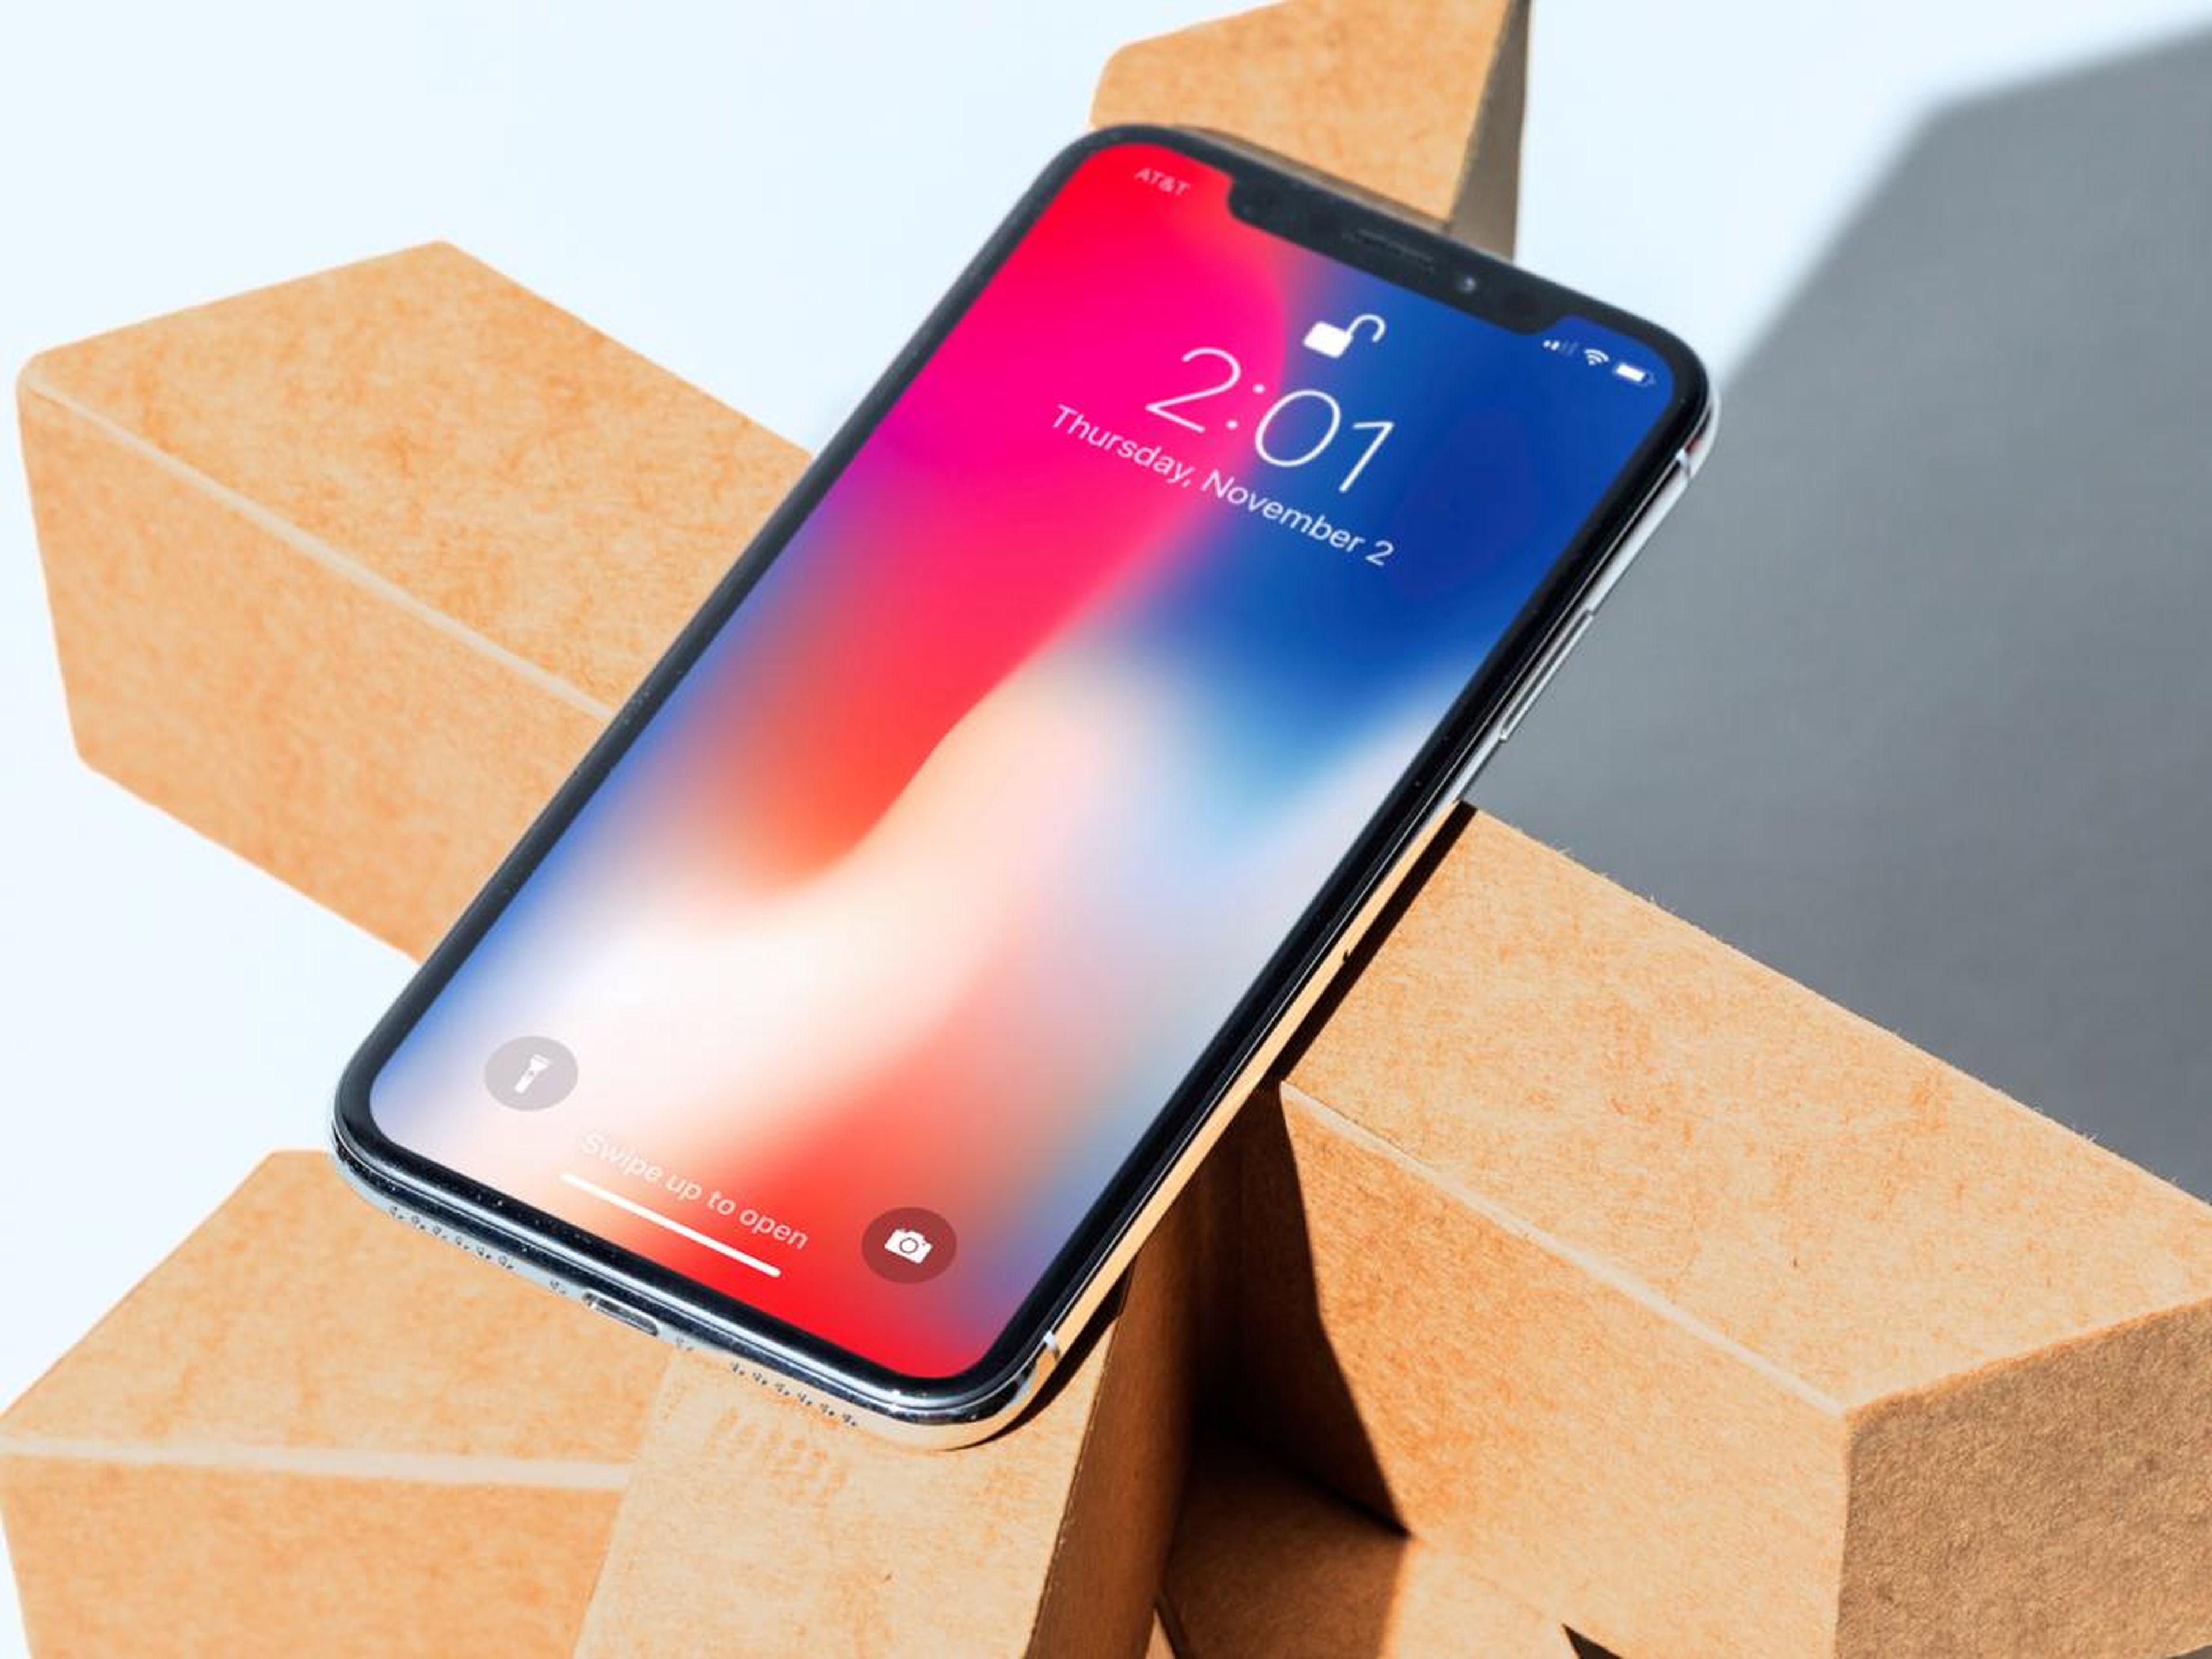 The iPhone X comes out on top of benchmark tests, but it's unlikely to be noticeable in real-life usage.